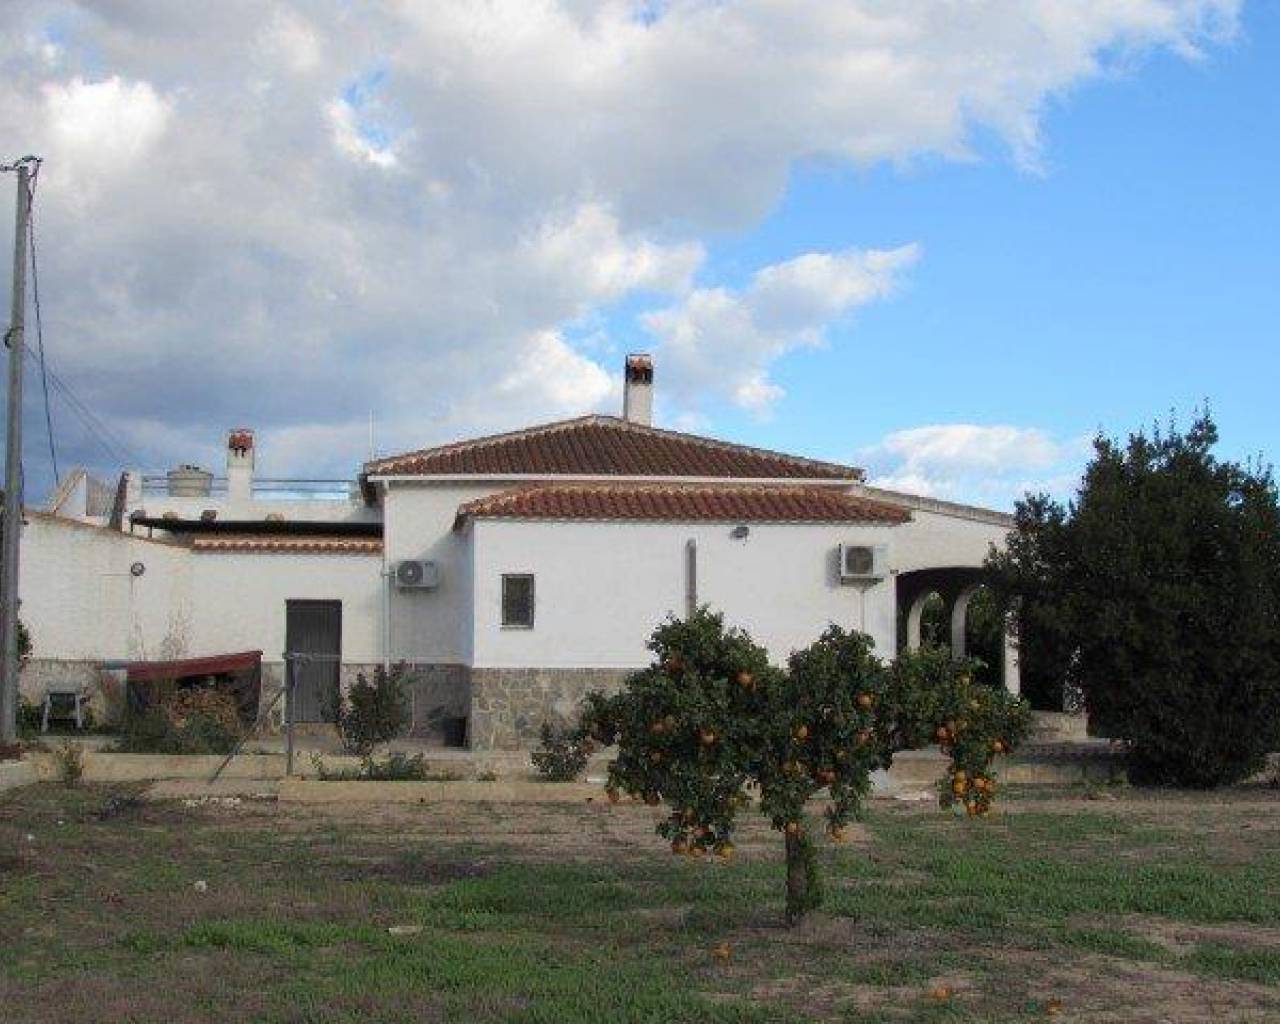 Resale - Finca - Country Property - Dolores